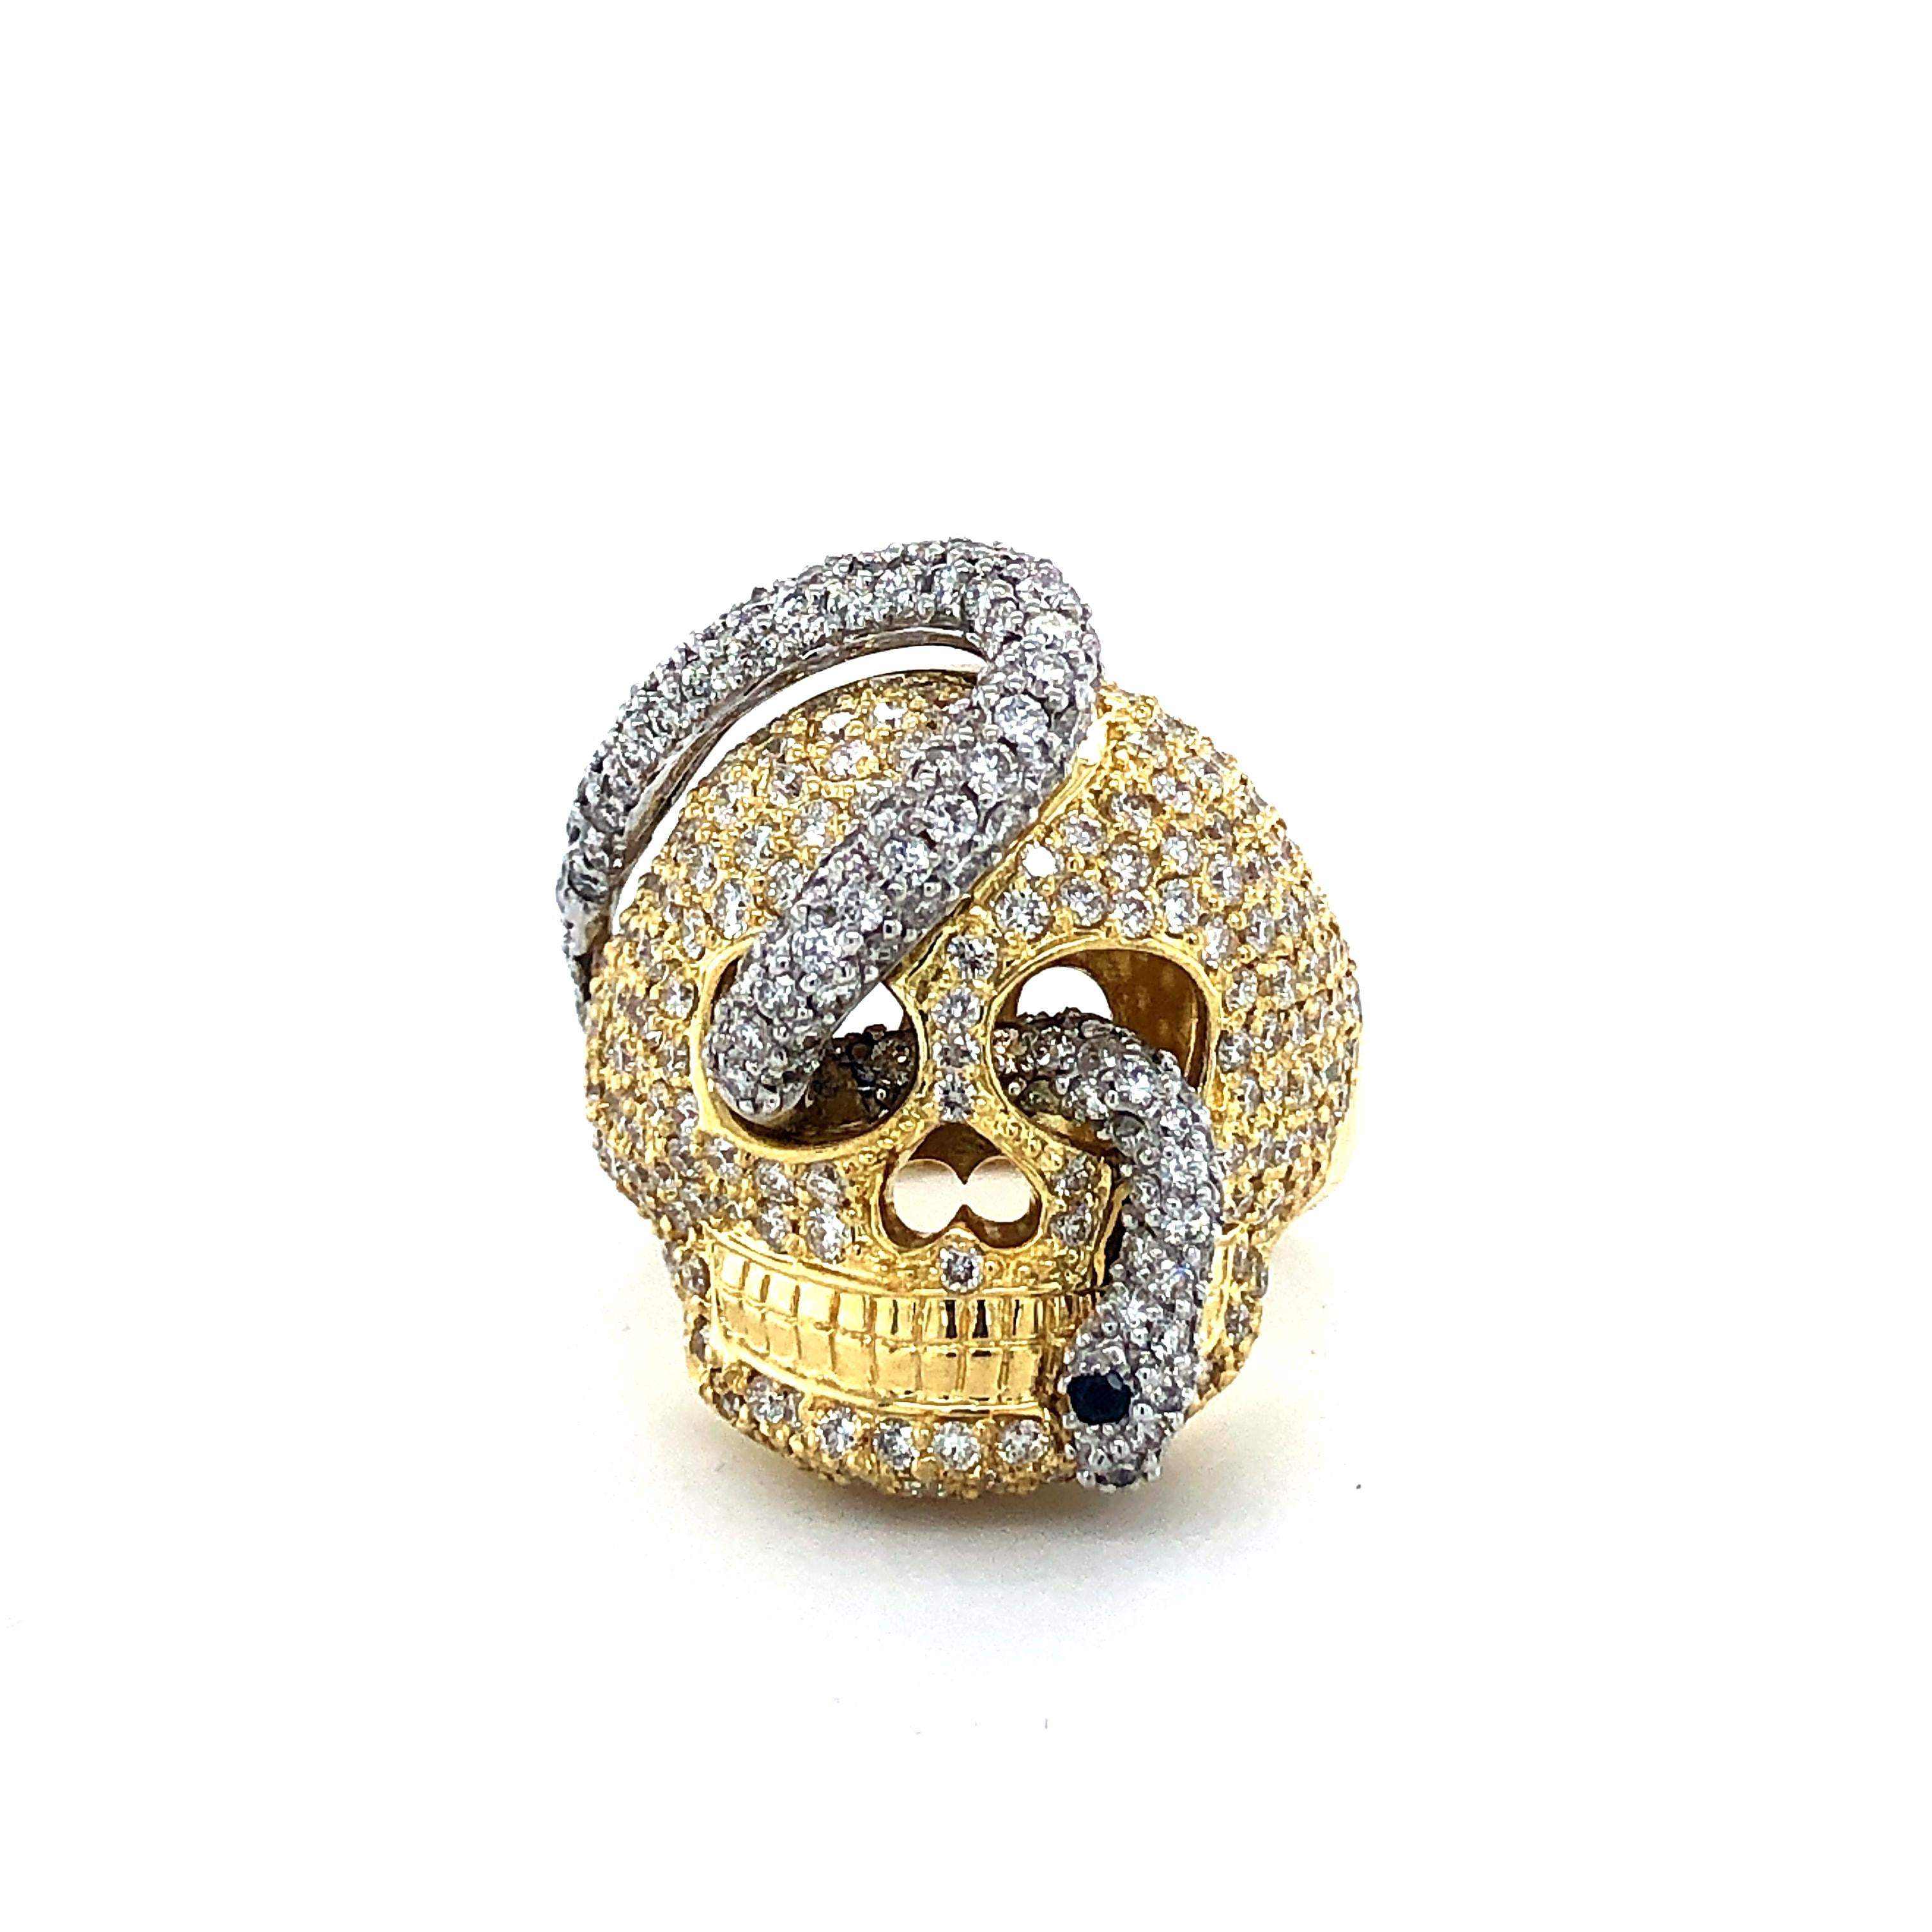 18kt White & Yellow Gold Diamond Snake and Skull Ring  Handmade 4.95ct 

Life is short, enjoy it while it lasts!

Very cool Snake and Skull ring made out of 18 kt yellow and white gold.

The skull is set in yellow gold, the snake is set in white